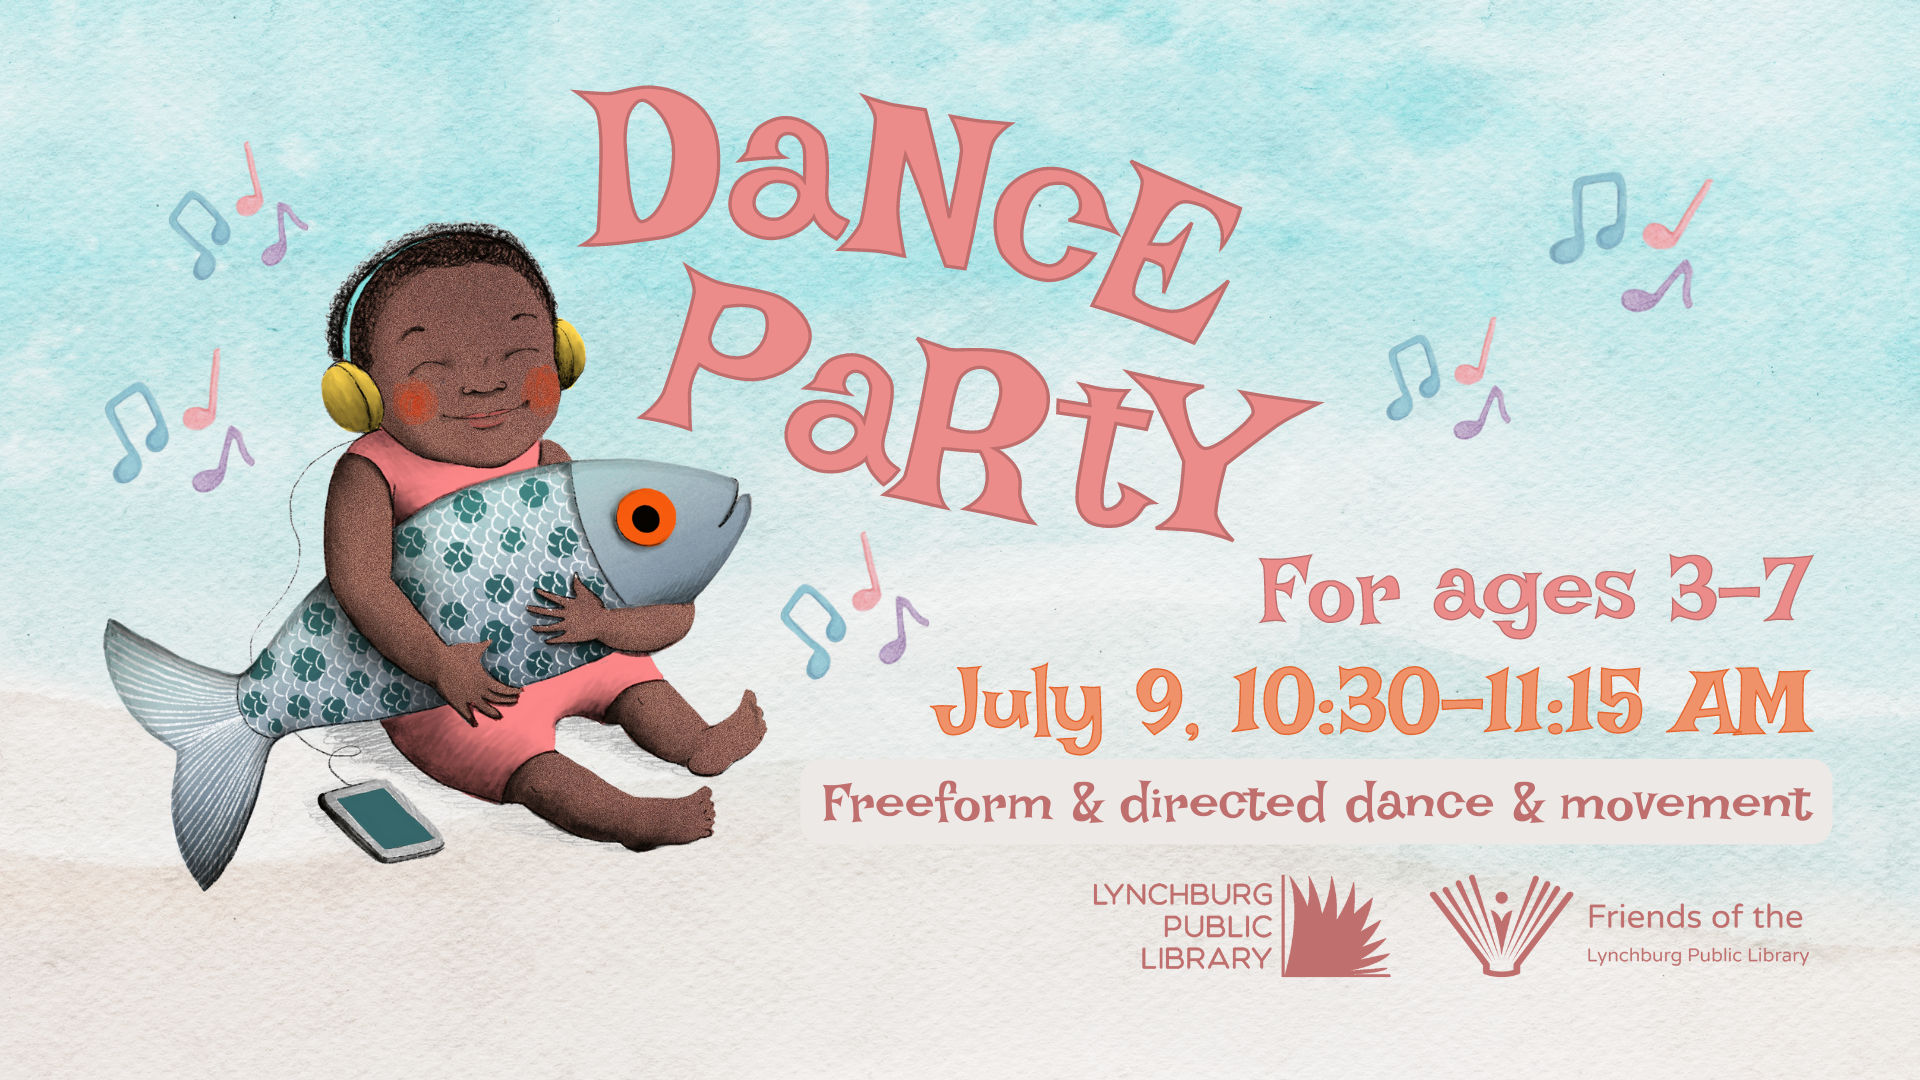 Image features the Dance Party information as described in the text of this event.